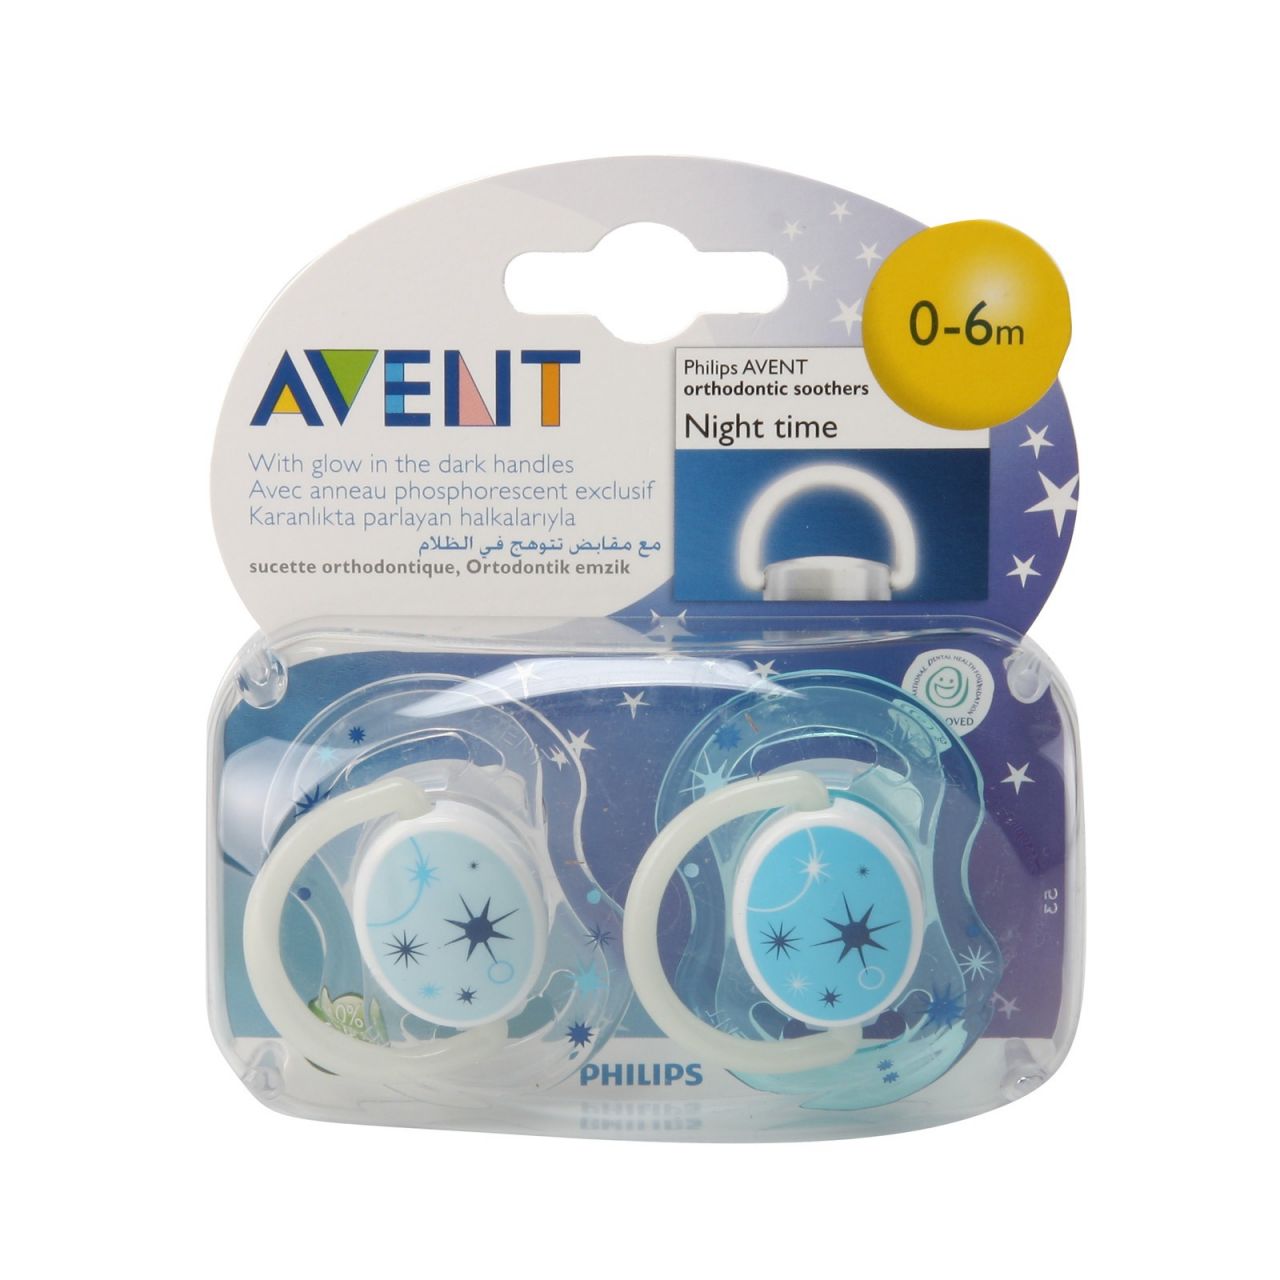 Sucettes Ultra Air Sucettes 6-18 Mois - Avent-philips - Allobebe Maroc